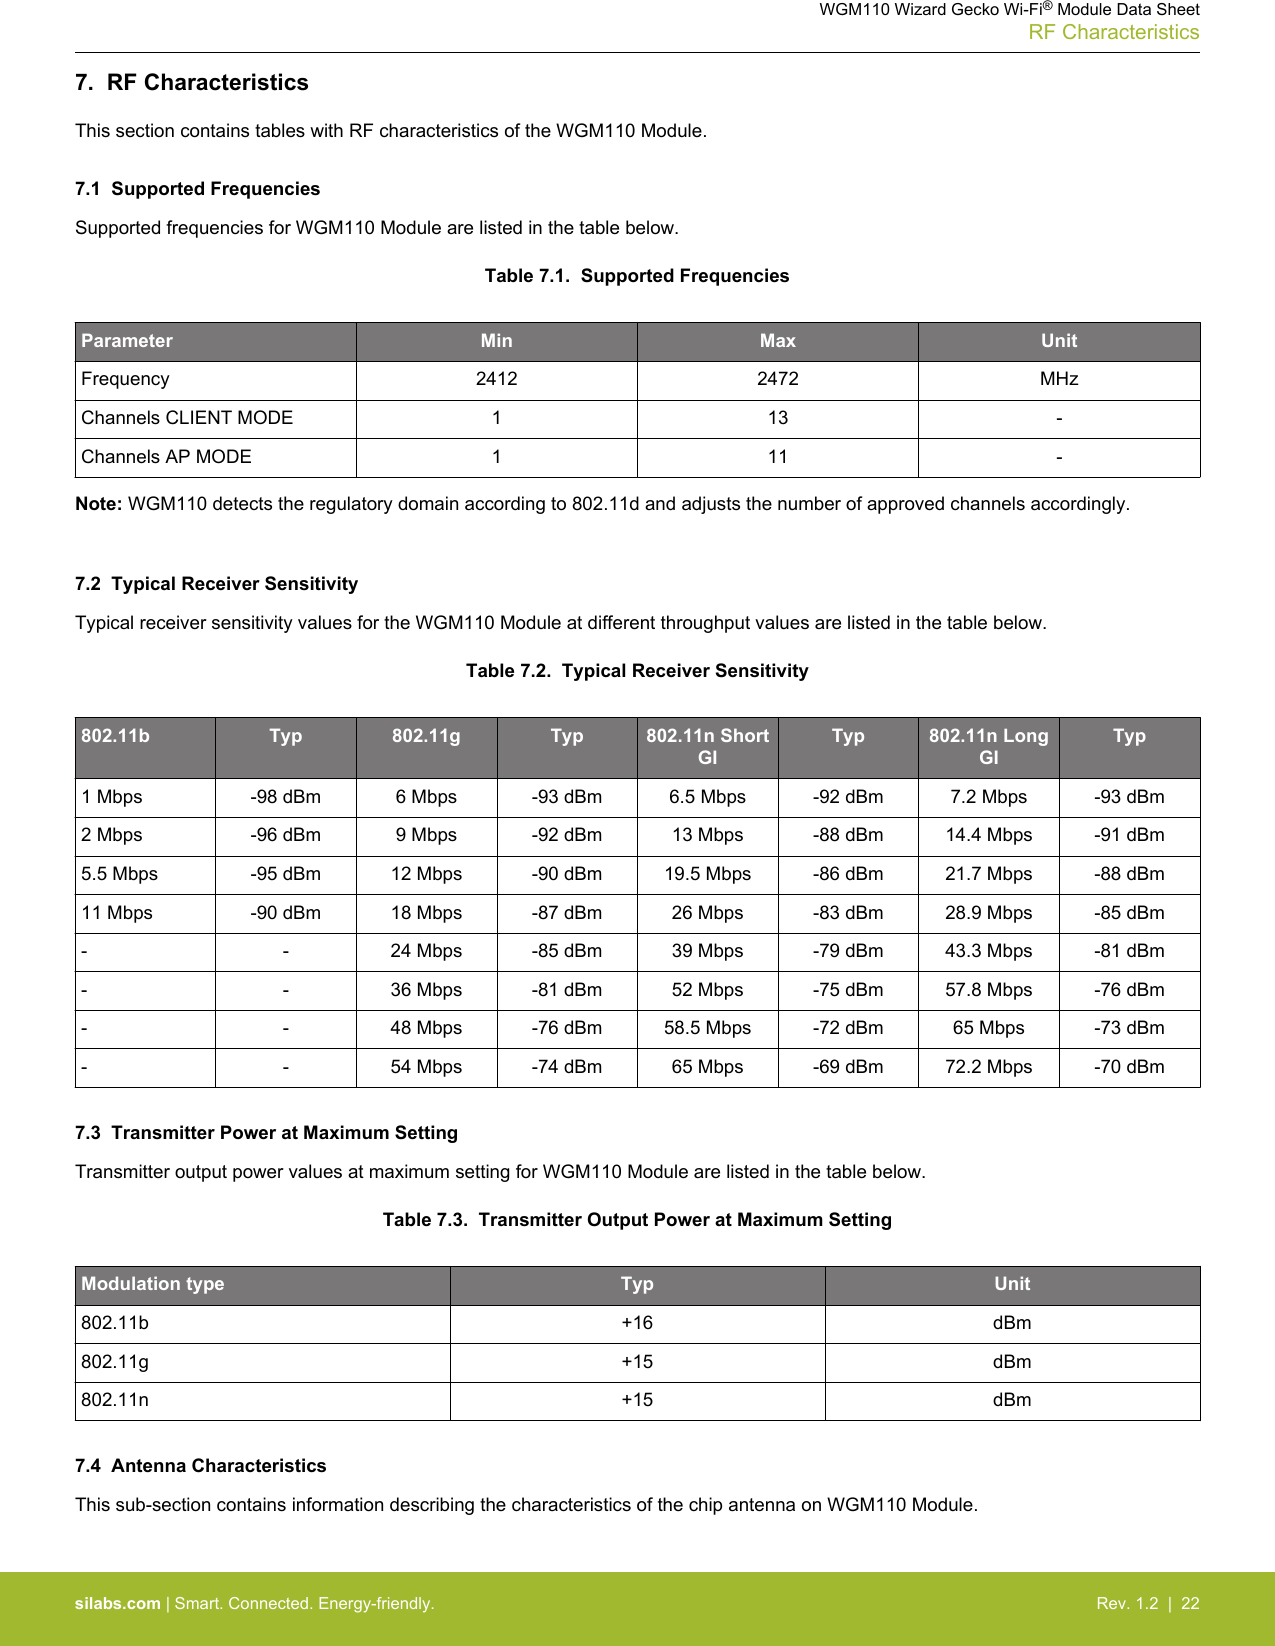 7.  RF CharacteristicsThis section contains tables with RF characteristics of the WGM110 Module.7.1  Supported FrequenciesSupported frequencies for WGM110 Module are listed in the table below.Table 7.1.  Supported FrequenciesParameter Min Max UnitFrequency 2412 2472 MHzChannels CLIENT MODE 1 13 -Channels AP MODE 1 11 -Note: WGM110 detects the regulatory domain according to 802.11d and adjusts the number of approved channels accordingly. 7.2  Typical Receiver SensitivityTypical receiver sensitivity values for the WGM110 Module at different throughput values are listed in the table below.Table 7.2.  Typical Receiver Sensitivity802.11b Typ 802.11g Typ 802.11n ShortGITyp 802.11n LongGITyp1 Mbps -98 dBm 6 Mbps -93 dBm 6.5 Mbps -92 dBm 7.2 Mbps -93 dBm2 Mbps -96 dBm 9 Mbps -92 dBm 13 Mbps -88 dBm 14.4 Mbps -91 dBm5.5 Mbps -95 dBm 12 Mbps -90 dBm 19.5 Mbps -86 dBm 21.7 Mbps -88 dBm11 Mbps -90 dBm 18 Mbps -87 dBm 26 Mbps -83 dBm 28.9 Mbps -85 dBm- - 24 Mbps -85 dBm 39 Mbps -79 dBm 43.3 Mbps -81 dBm- - 36 Mbps -81 dBm 52 Mbps -75 dBm 57.8 Mbps -76 dBm- - 48 Mbps -76 dBm 58.5 Mbps -72 dBm 65 Mbps -73 dBm- - 54 Mbps -74 dBm 65 Mbps -69 dBm 72.2 Mbps -70 dBm7.3  Transmitter Power at Maximum SettingTransmitter output power values at maximum setting for WGM110 Module are listed in the table below.Table 7.3.  Transmitter Output Power at Maximum SettingModulation type Typ Unit802.11b +16 dBm802.11g +15 dBm802.11n +15 dBm7.4  Antenna CharacteristicsThis sub-section contains information describing the characteristics of the chip antenna on WGM110 Module.WGM110 Wizard Gecko Wi-Fi® Module Data SheetRF Characteristicssilabs.com | Smart. Connected. Energy-friendly. Rev. 1.2  |  22